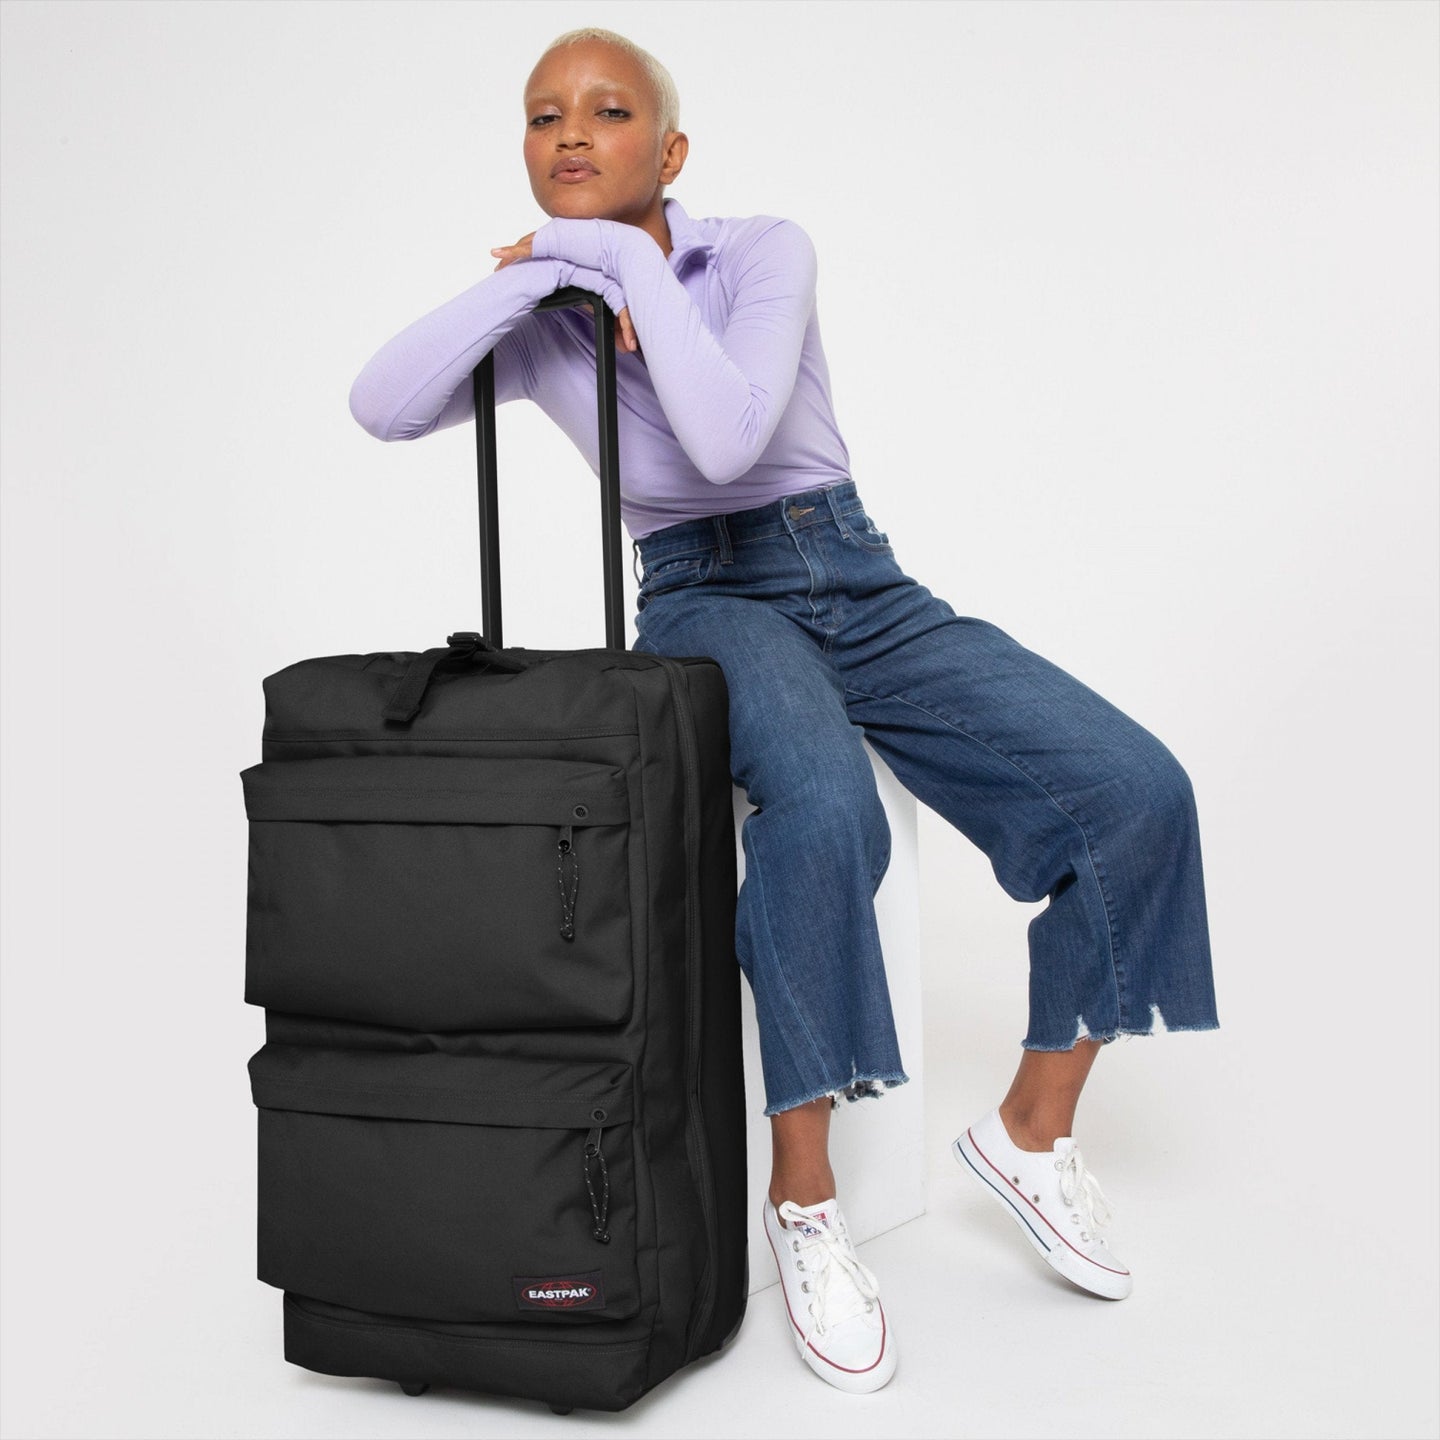  Eastpak Tranverz L - Suitcase with Wheels - Rolling Luggage  for Travel with TSA Lock, 2 Wheels, 2 Compartments, and Compression Straps  - Black Denim